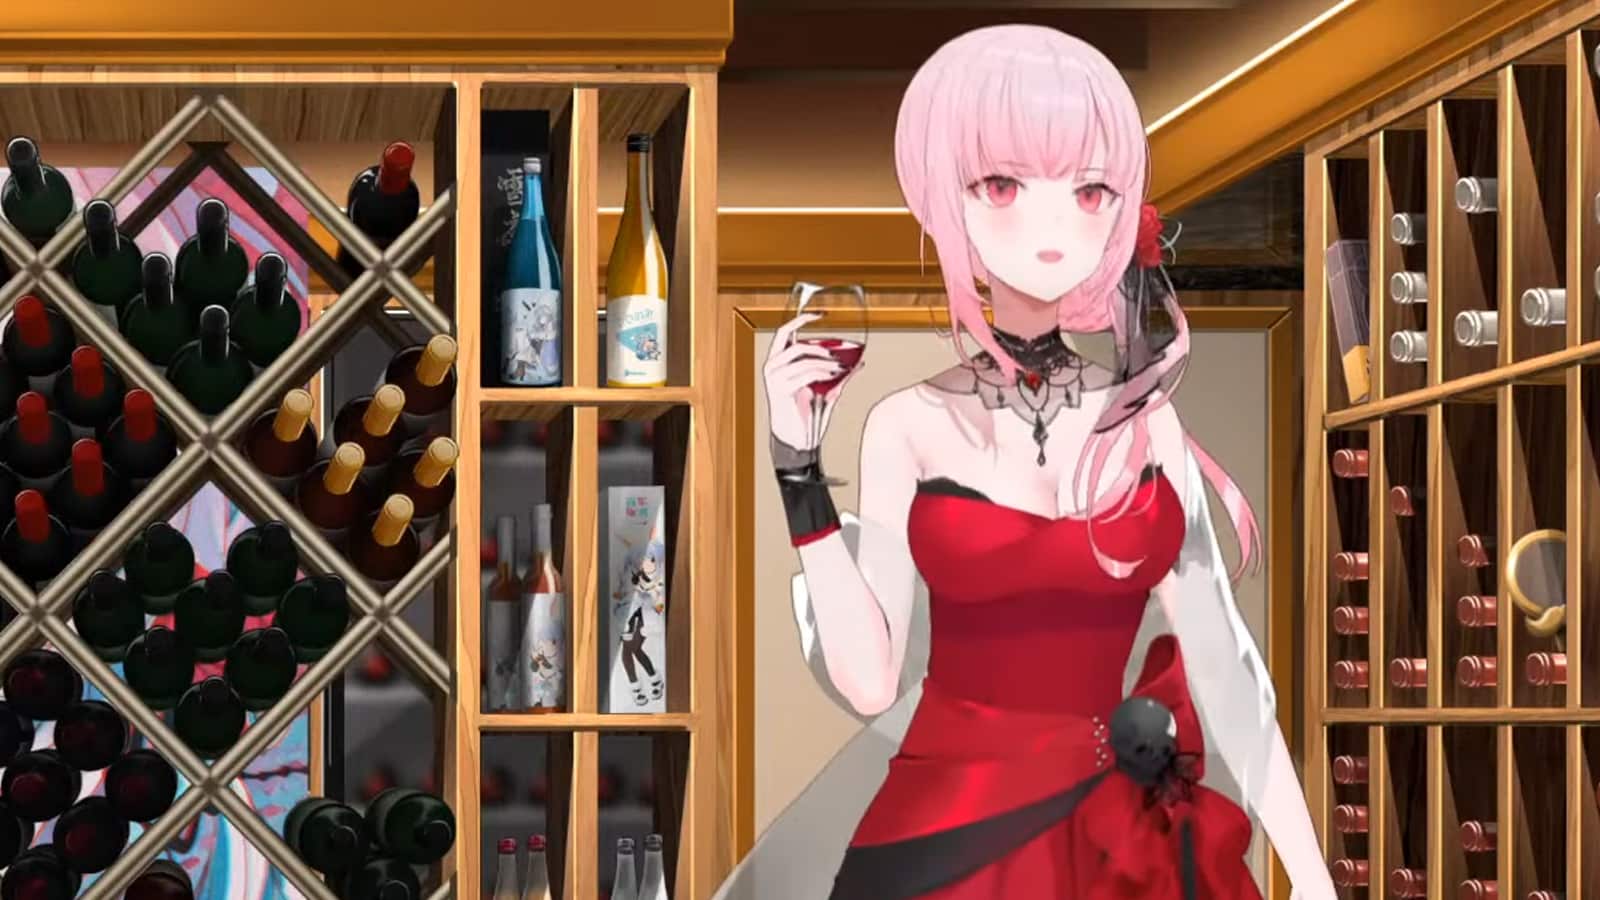 Hololive VTuber Mori Calliope in red dress holding glass of wine